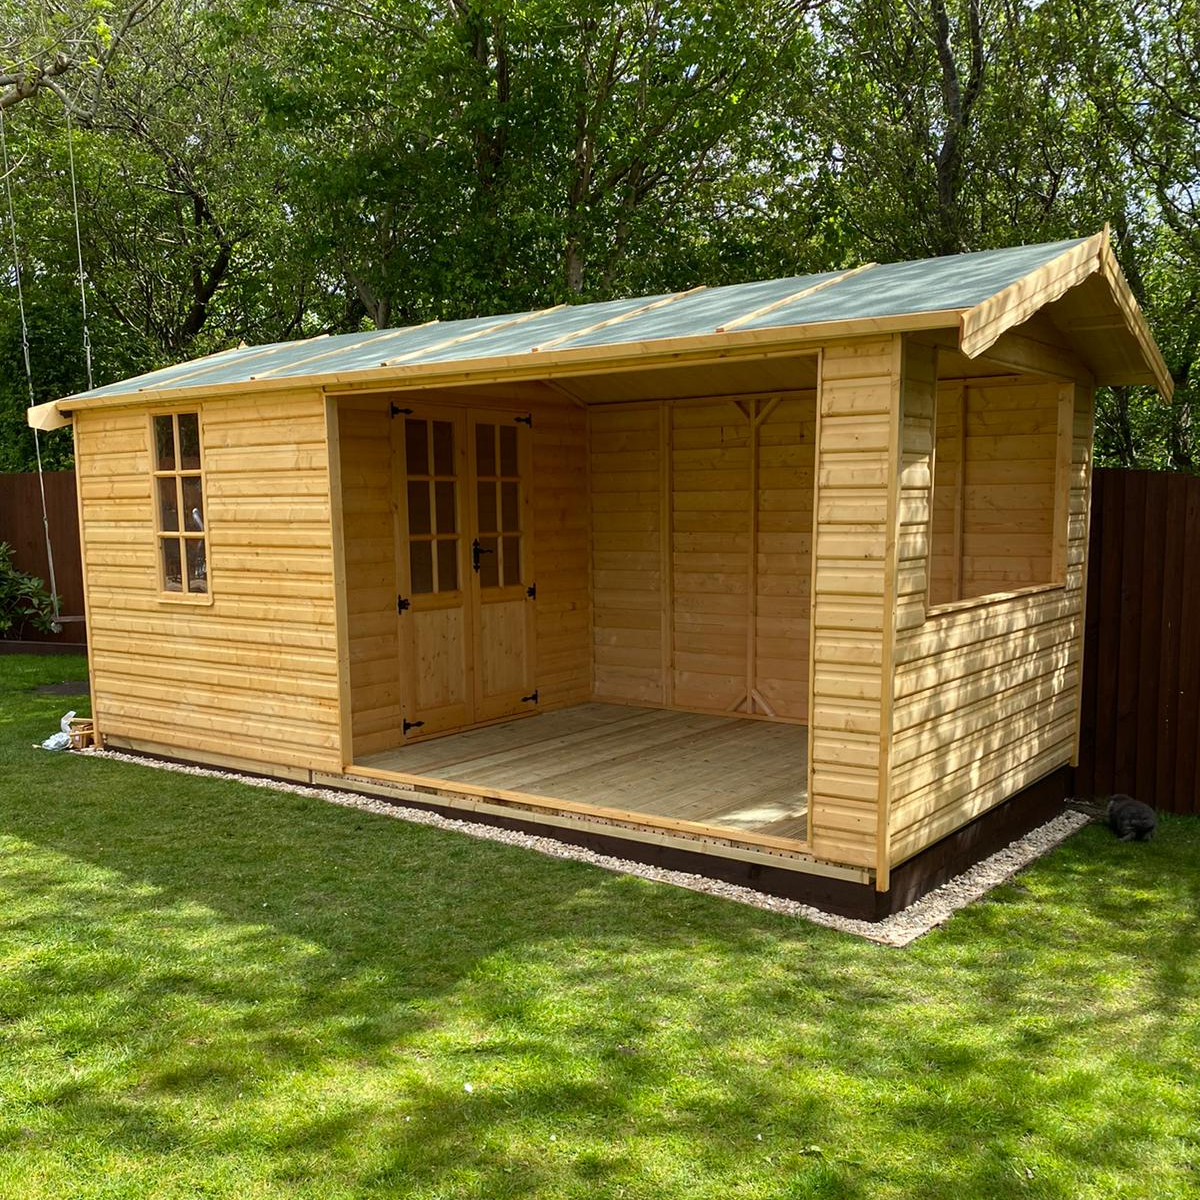 16' x 8' Apex Style Summerhouse with decking area. Painted Golden Brown.